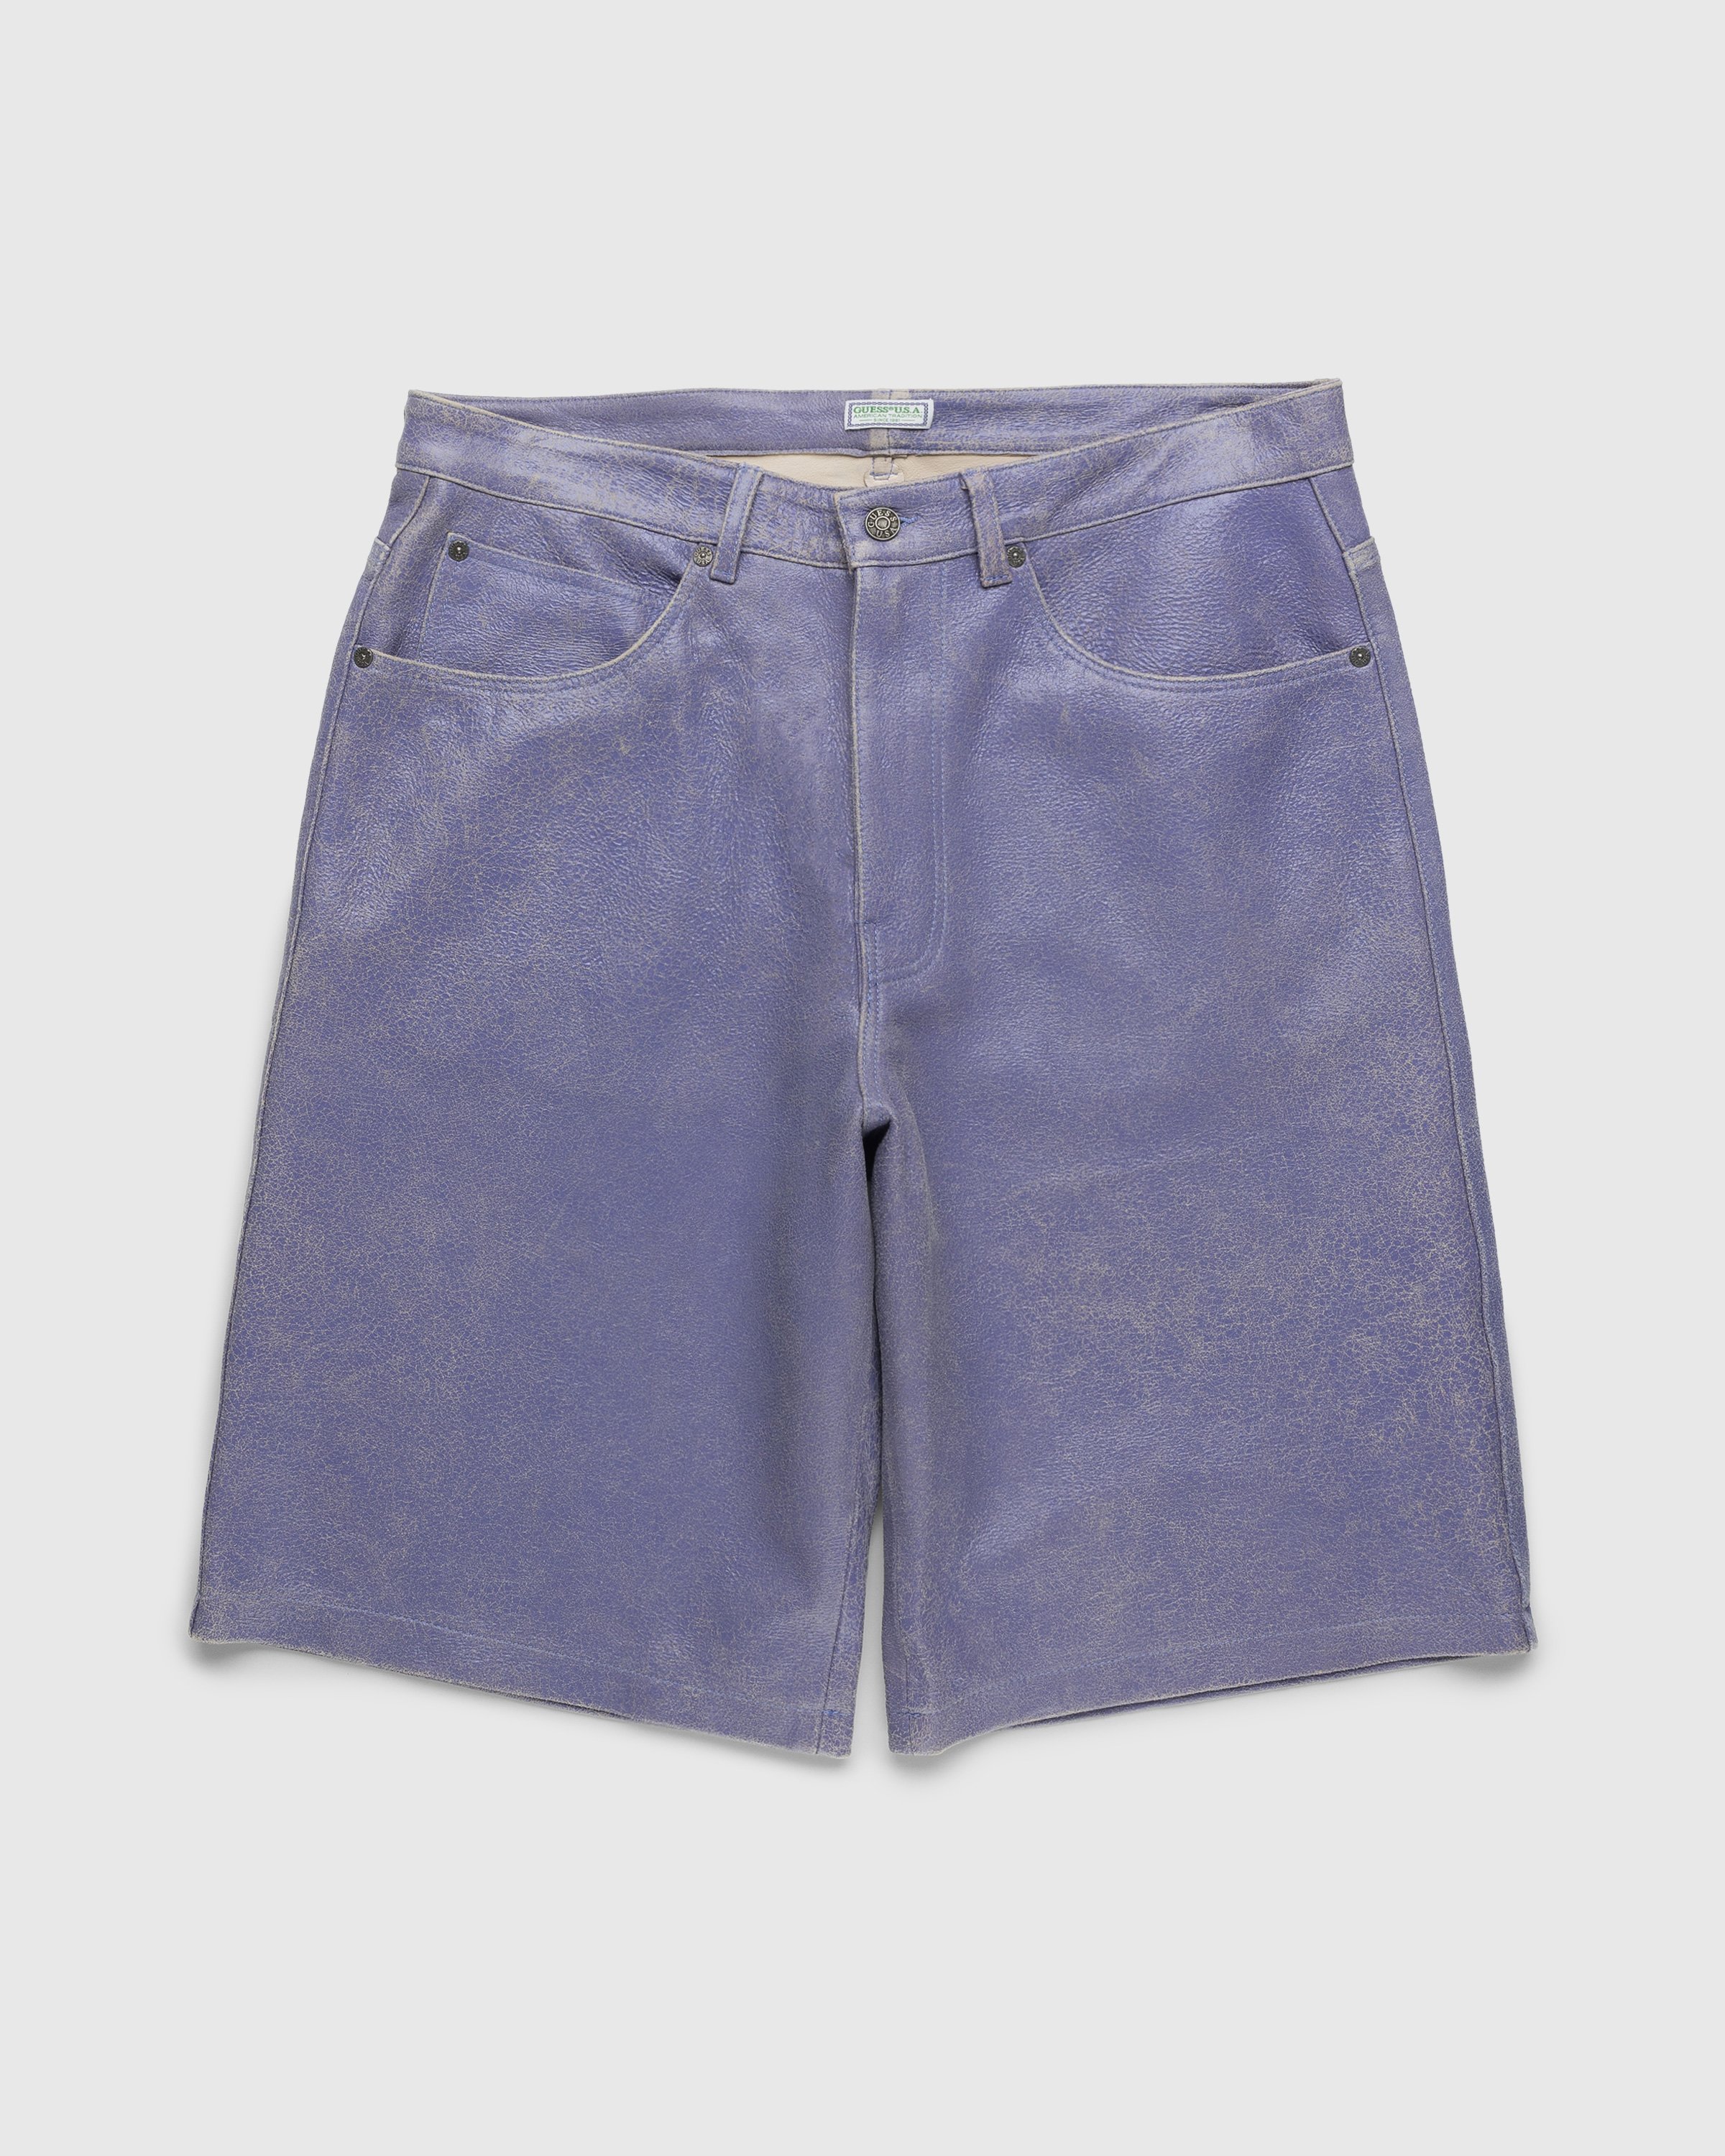 Guess USA - Crackle Leather Short Purple - Clothing - Purple - Image 1